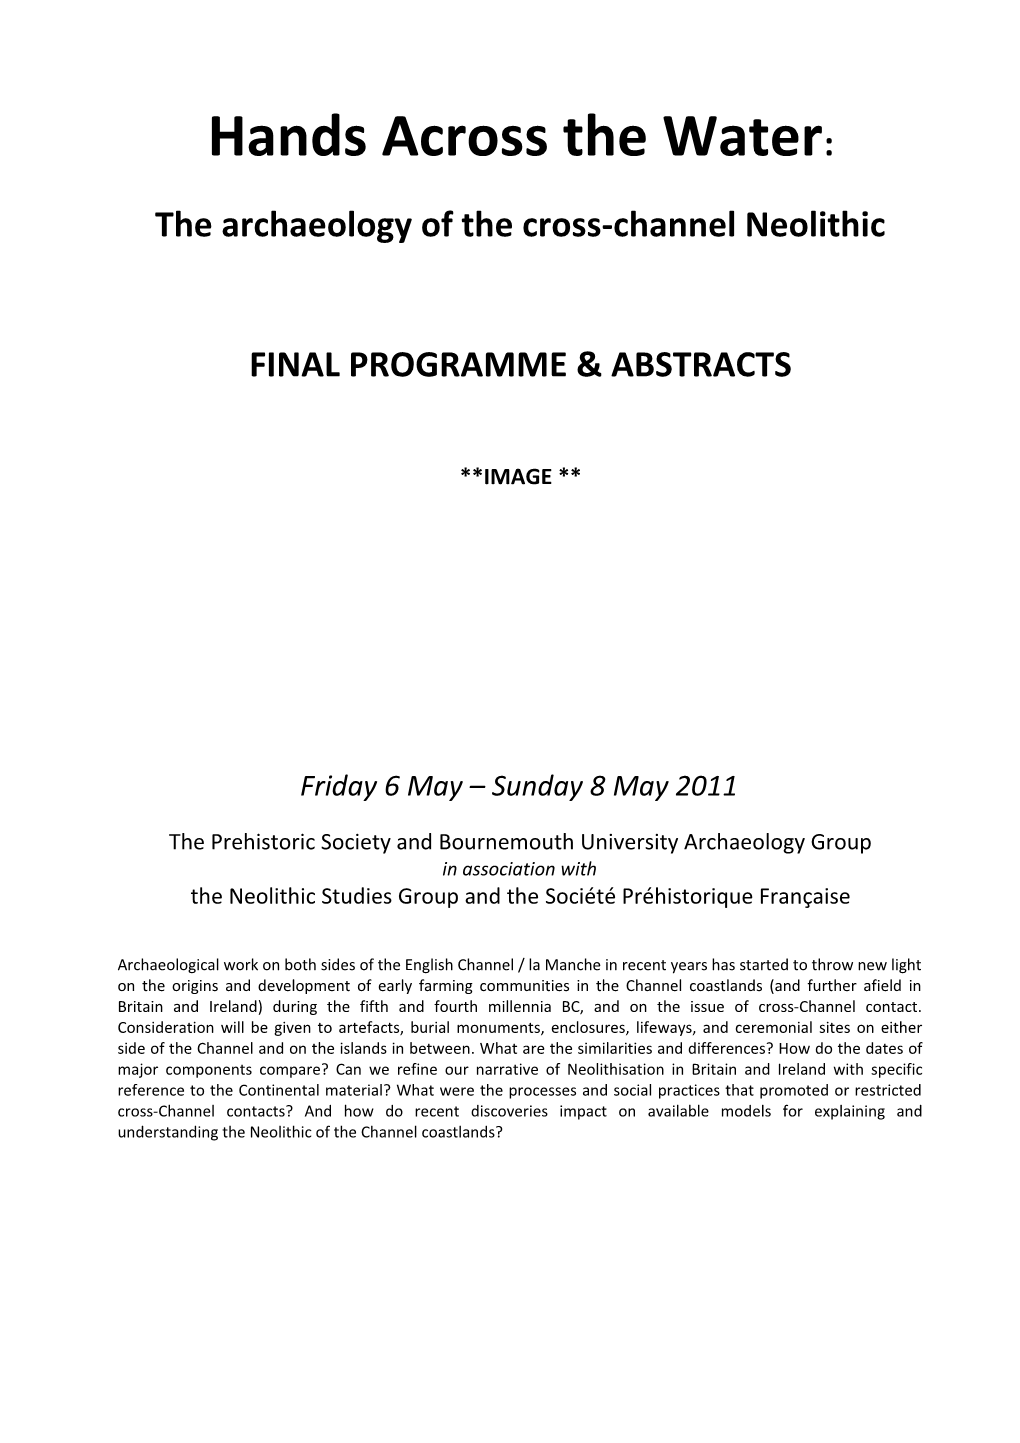 Hands Across the Water: the Archaeology of the Cross-Channel Neolithic